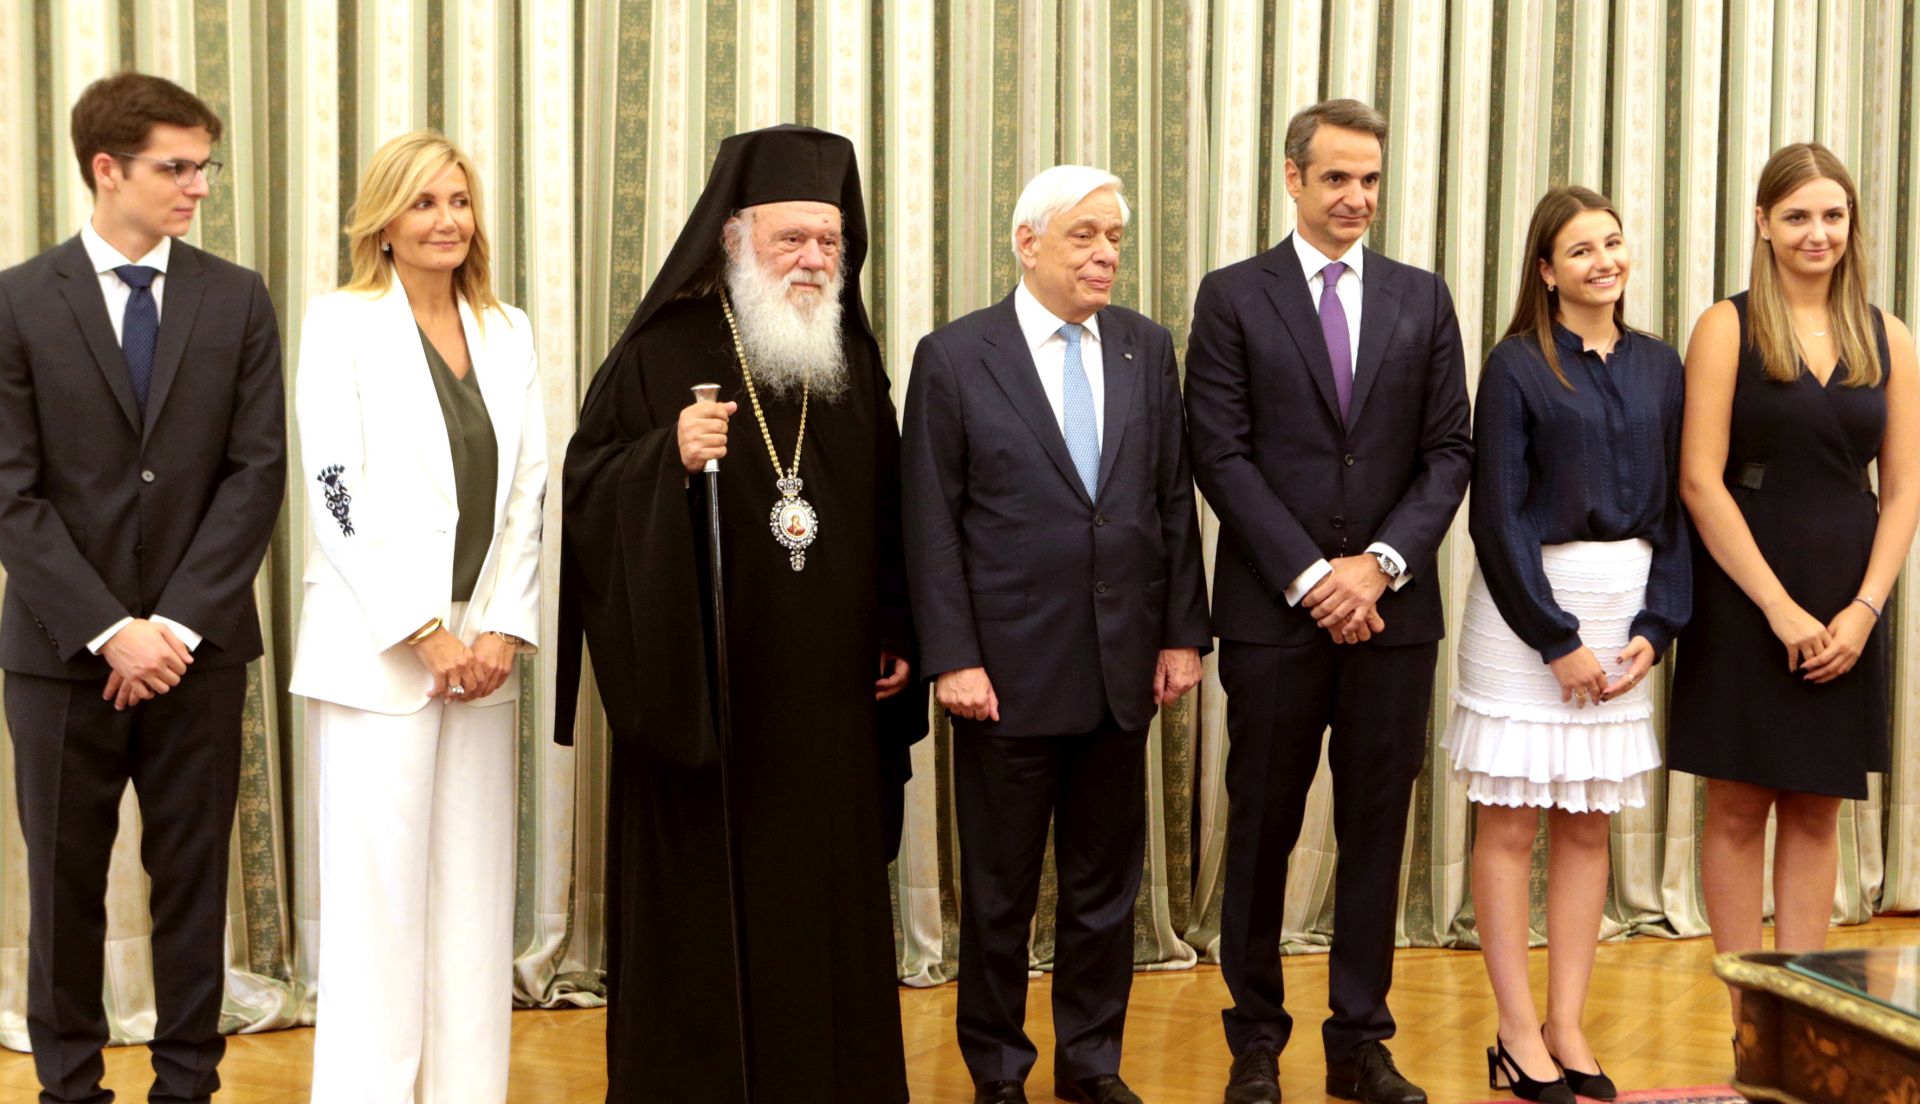 epa07703032 New Greek Prime Minister Kyriakos Mitsotakis (3-R) poses for a photo with Greek President Prokopis Pavlopoulos (C), Greek Archbishop Ieronymos II (3-L), Mitsotakis' wife Mareva Grabowski (2-L) and his children, Konstantinos (L), Dafni (R) and Sophia (2-R) after his swearing-in ceremony at the presidential palace in Athens, Greece, 08 July 2019. The center-right New Democracy party won general elections in Greece on 07 July and will form a majority government. A total of six parties will enter parliament based on the results. Voter participation reached 57.92 percent.  EPA/PANTELIS SAITAS